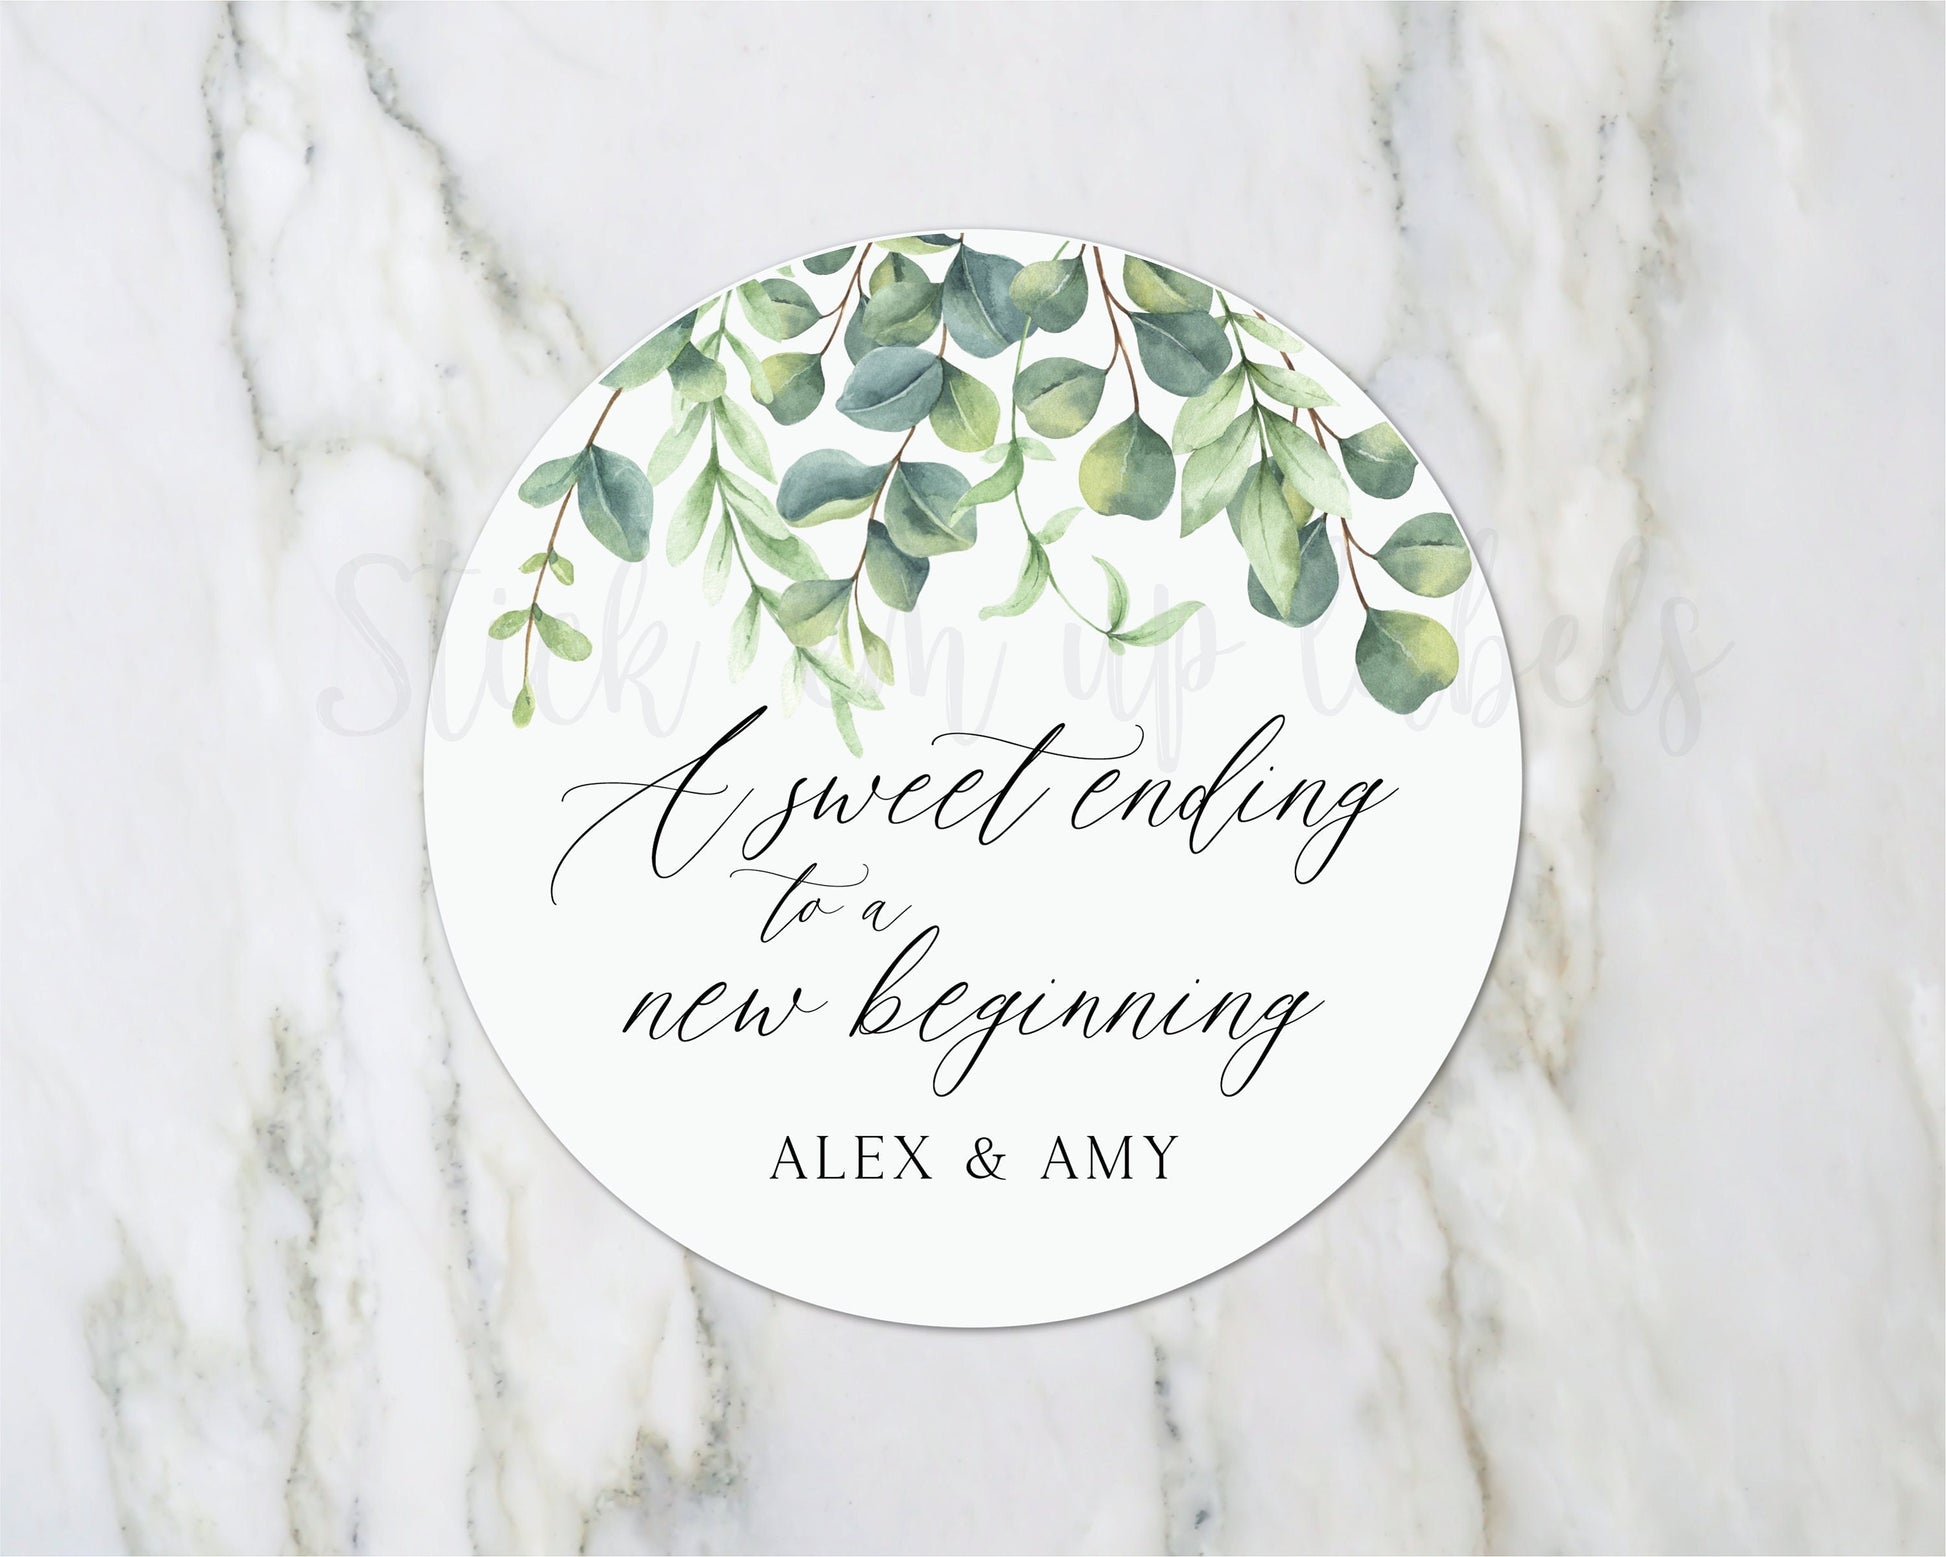 Sweet Ending to a New Beginning Stickers - Wedding Favor Stickers, Greenery Botanical Stickers, Cookie Favor Stickers, Eucalyptus Wedding